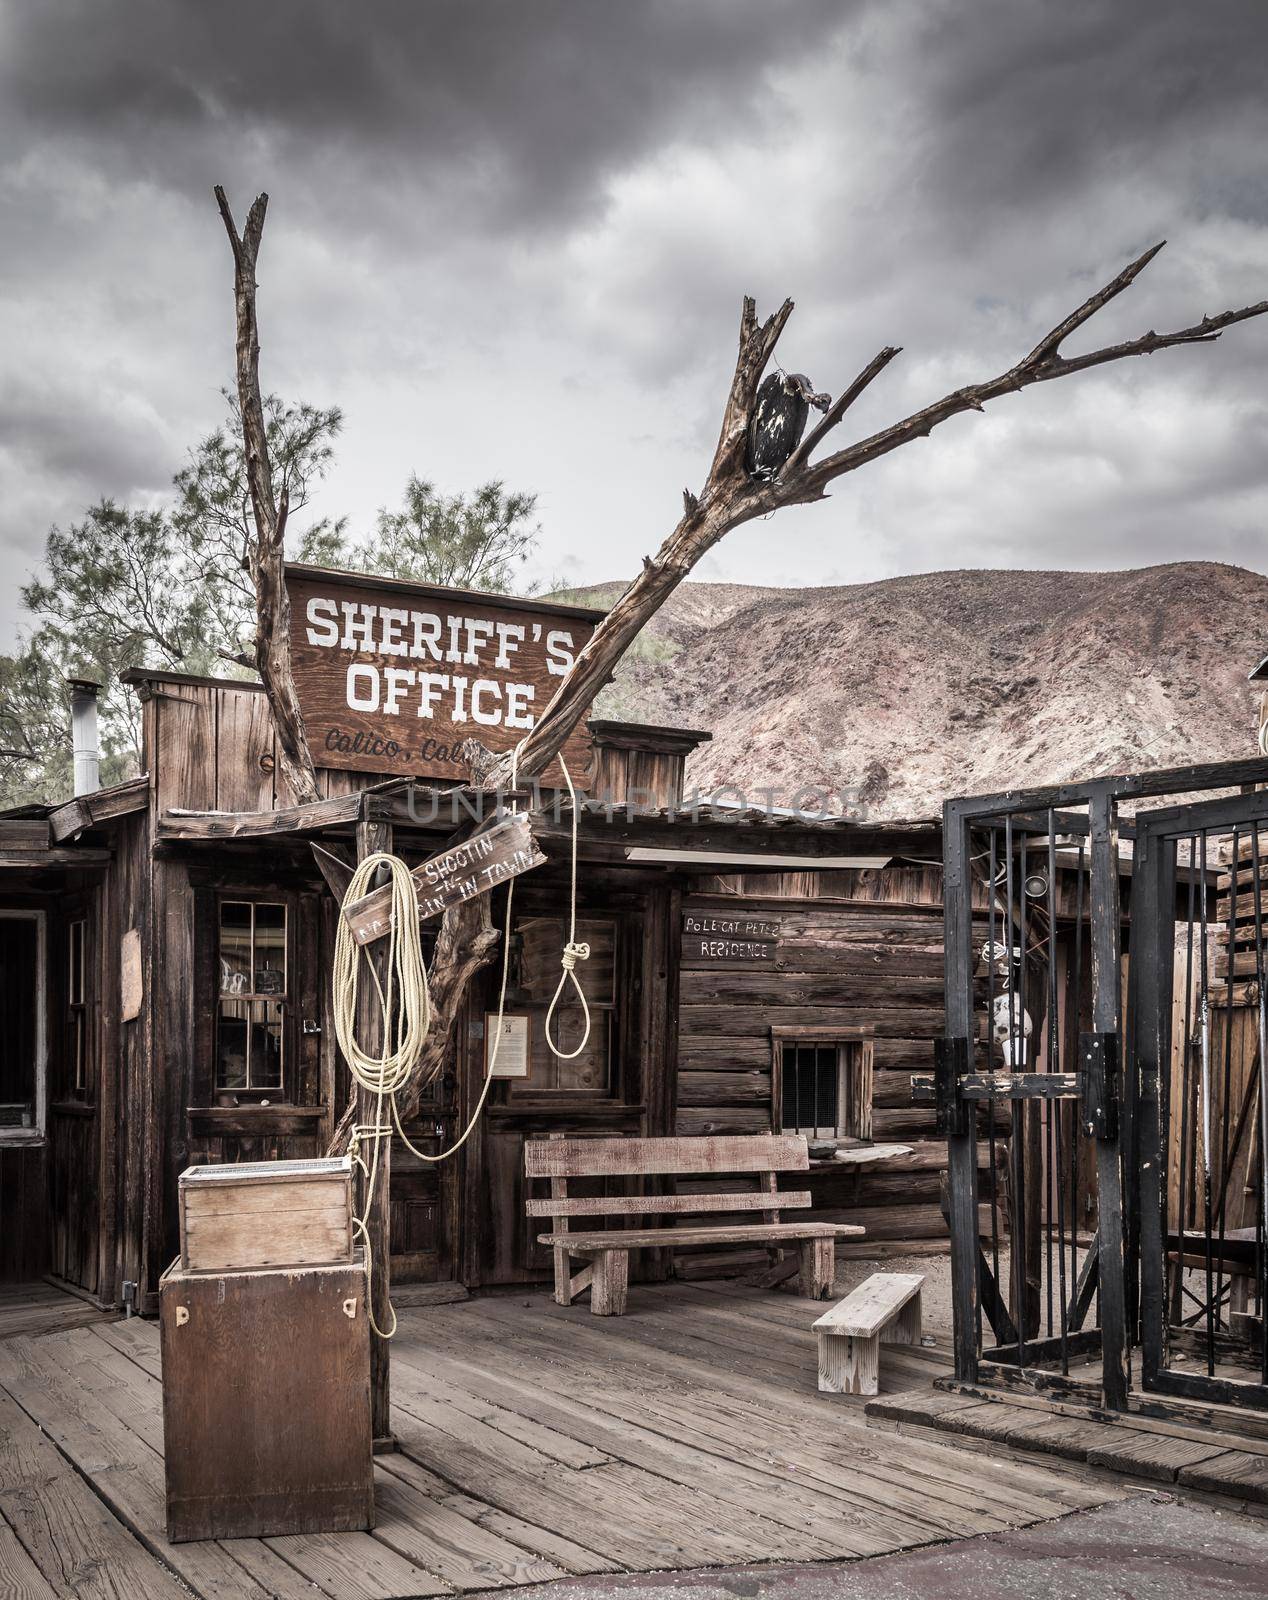 MAY 23. 2015- Sheriff `s office in Calico, CA, USA: Calico is a ghost town in San Bernardino County, California, United States. Was founded in 1881 as a silver mining town. Now it is a county park.